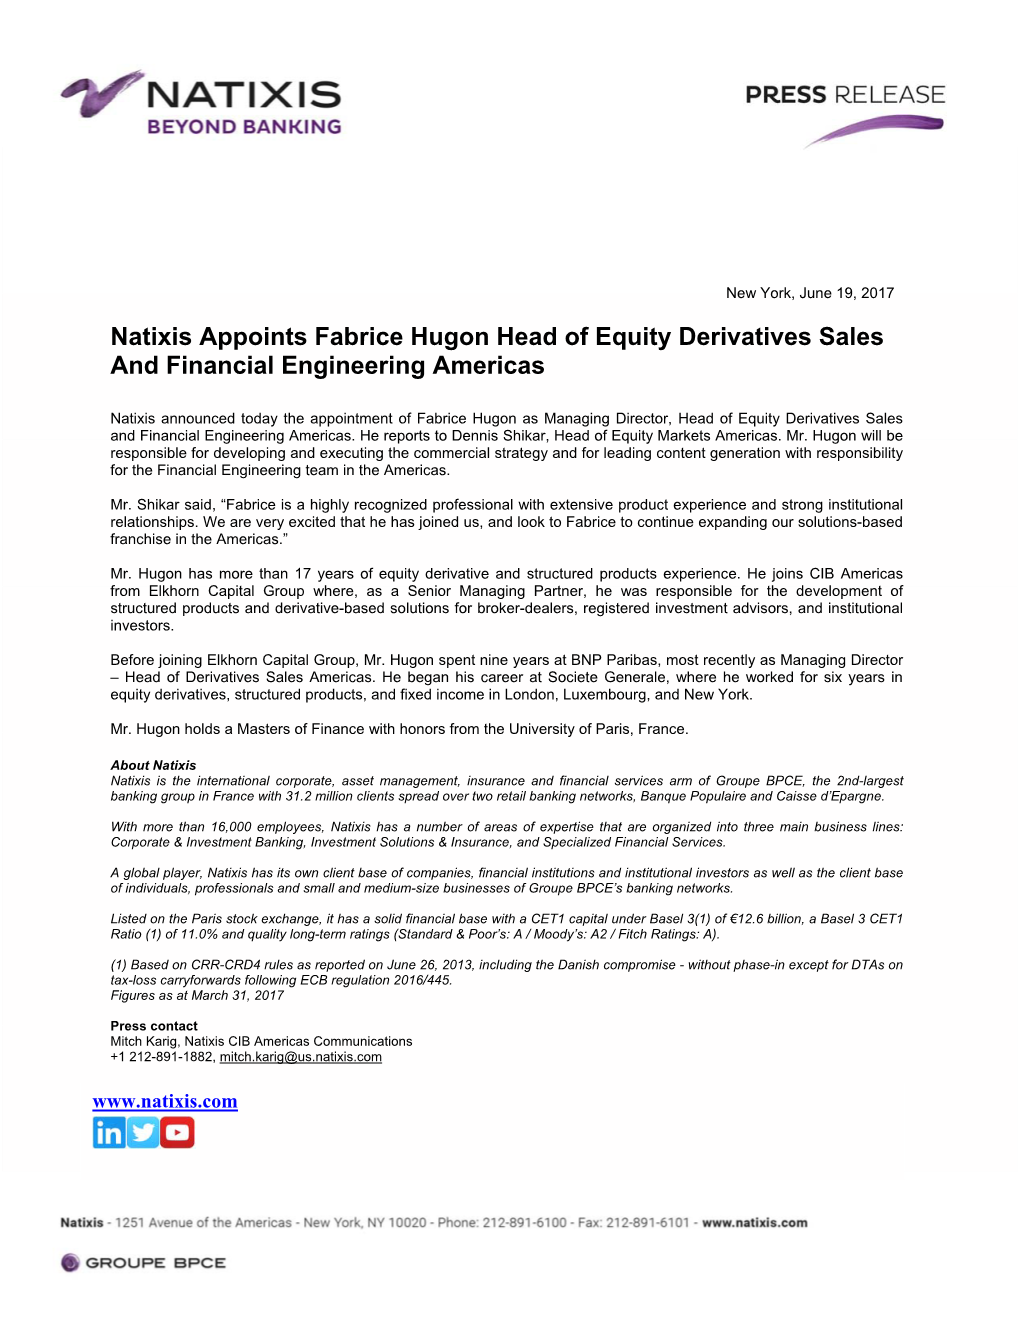 Natixis Appoints Fabrice Hugon Head of Equity Derivatives Sales and Financial Engineering Americas